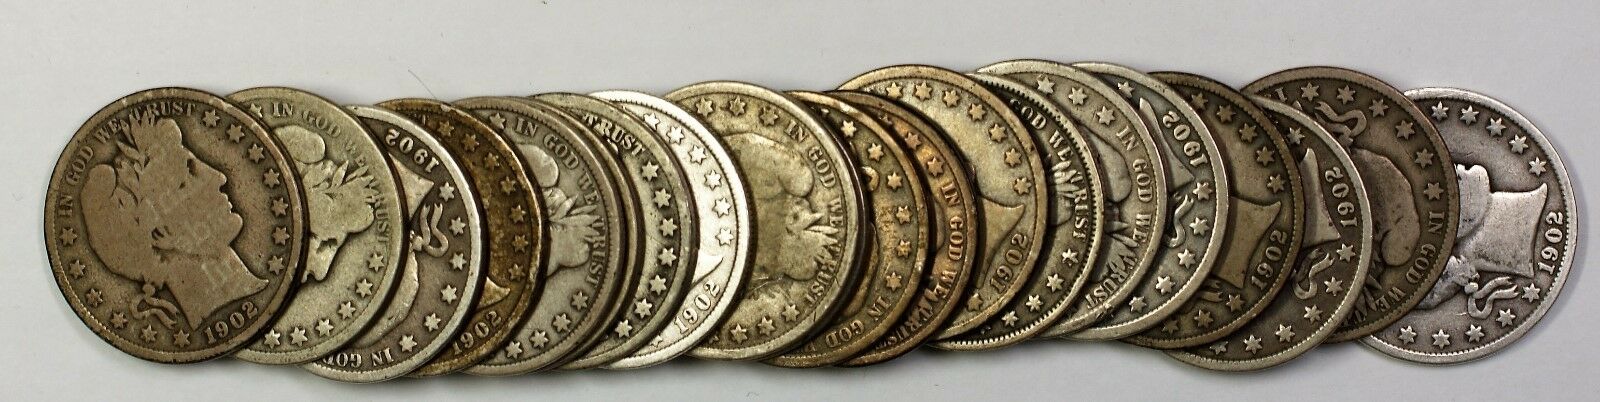 1906 Barber Half Dollar 50c Roll 20 Circulated 90% Old Silver Coins Lot